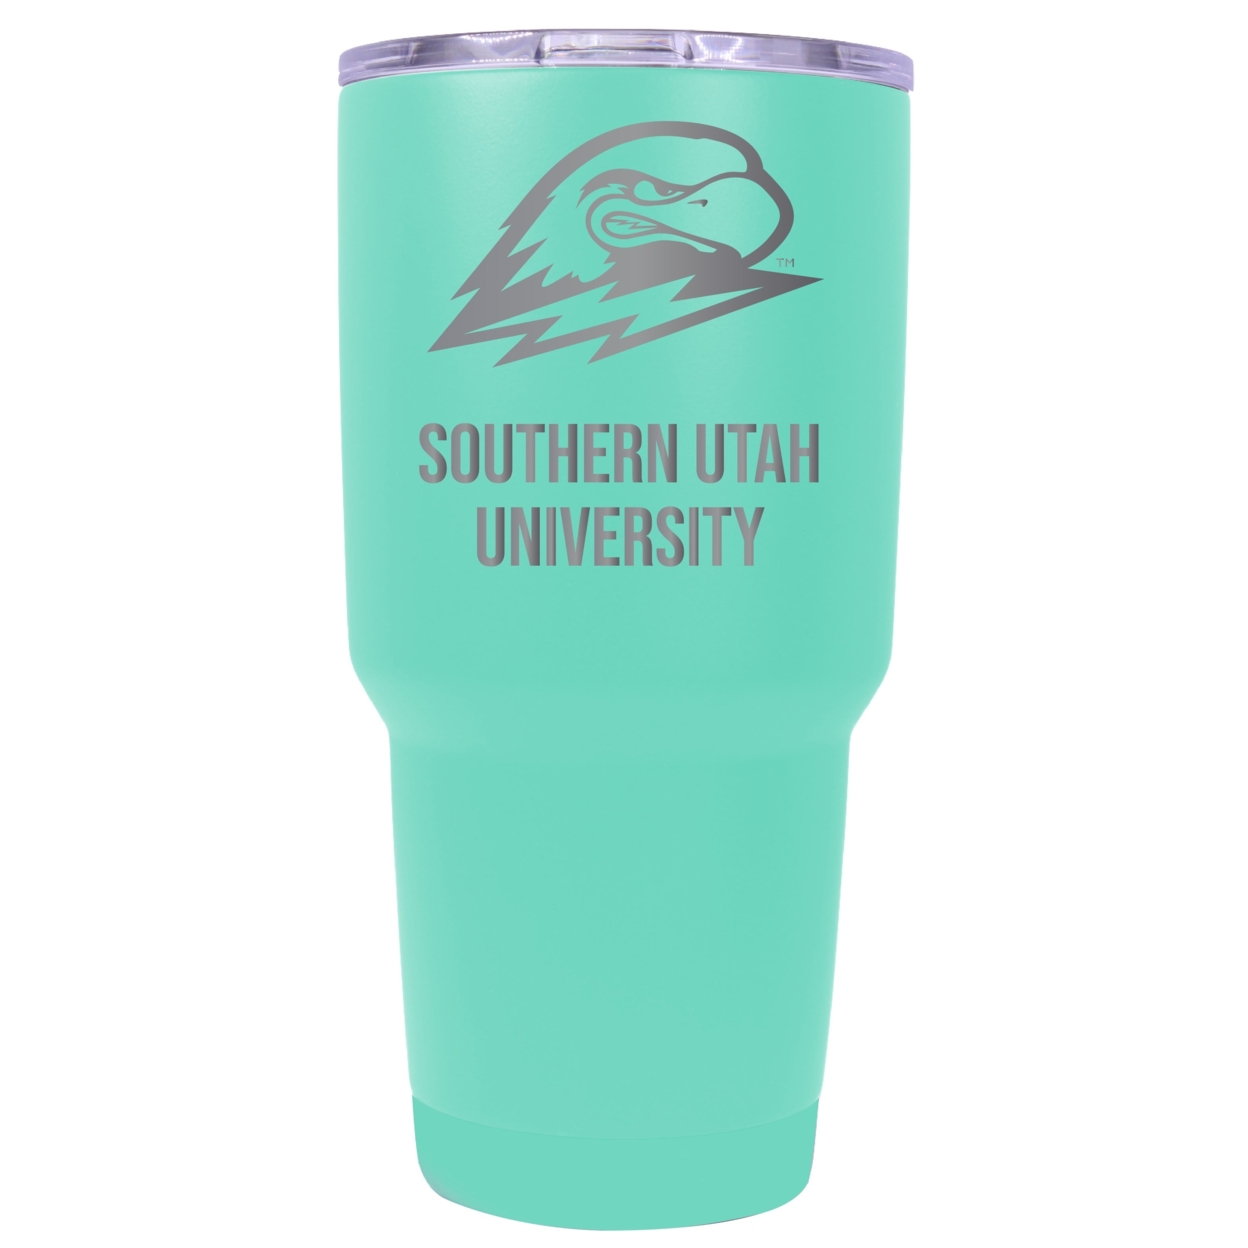 Southern Utah University 24 Oz Laser Engraved Stainless Steel Insulated Tumbler - Choose Your Color. - Coral